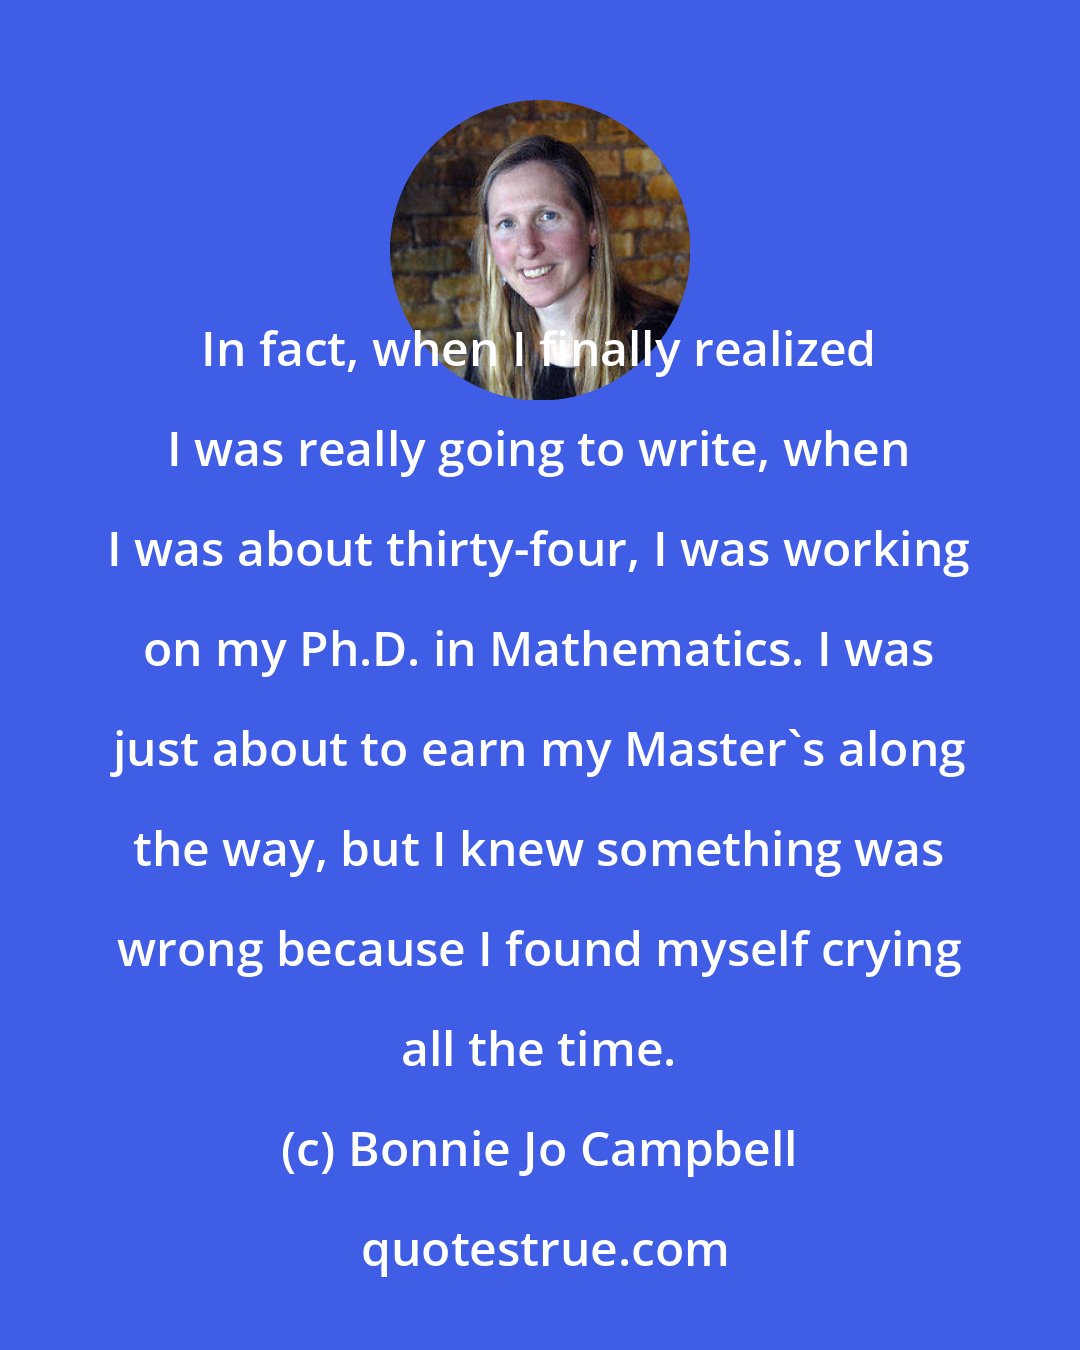 Bonnie Jo Campbell: In fact, when I finally realized I was really going to write, when I was about thirty-four, I was working on my Ph.D. in Mathematics. I was just about to earn my Master's along the way, but I knew something was wrong because I found myself crying all the time.